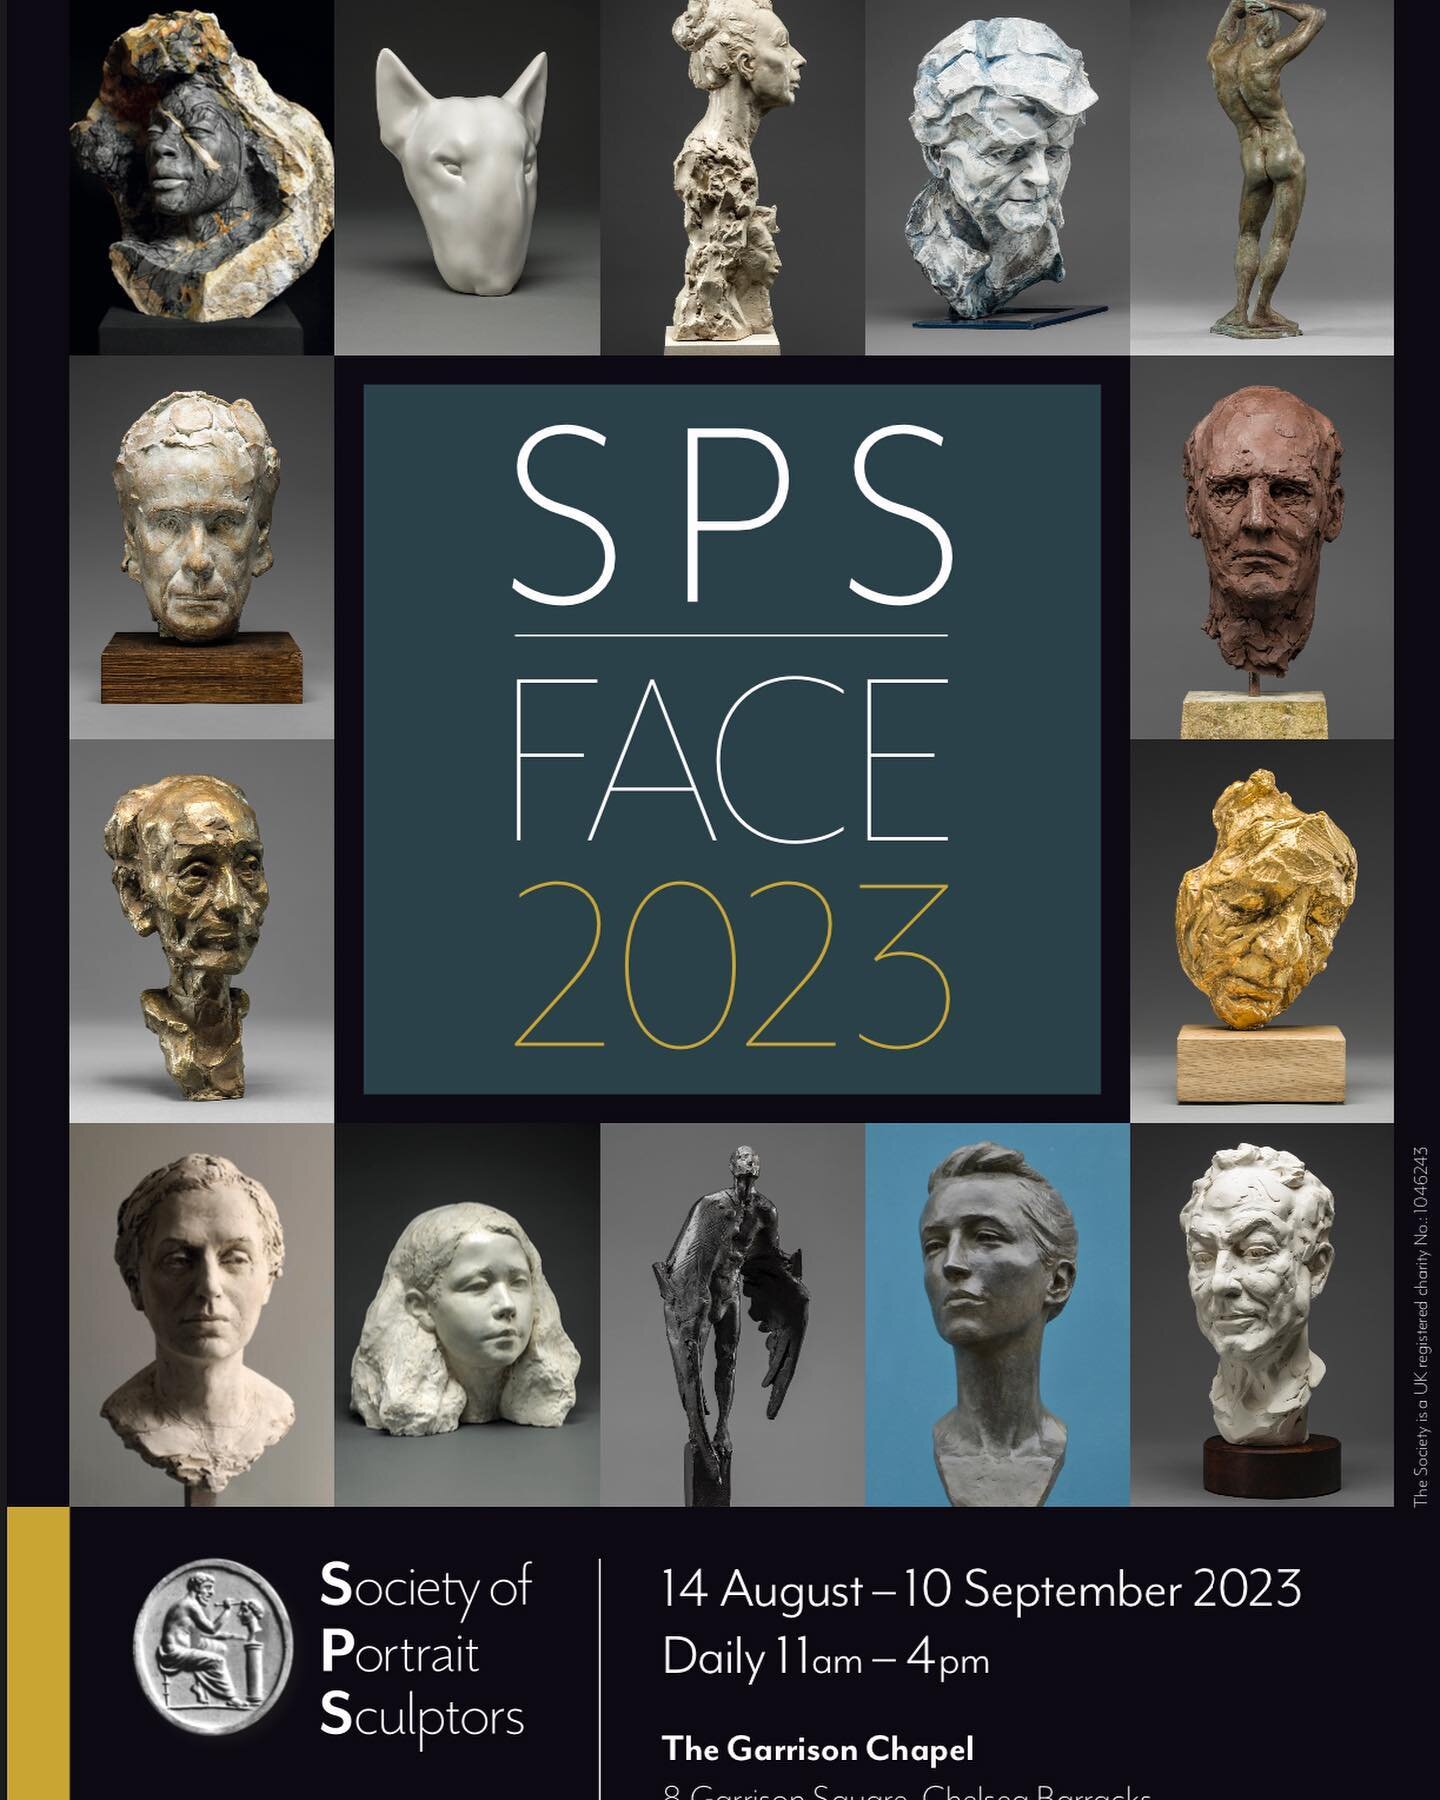 I&rsquo;m thrilled to have a piece in the #societyofportraitsculptors annual exhibition. If you&rsquo;re in London I would highly recommend the exhibition, lots of inspiring pieces